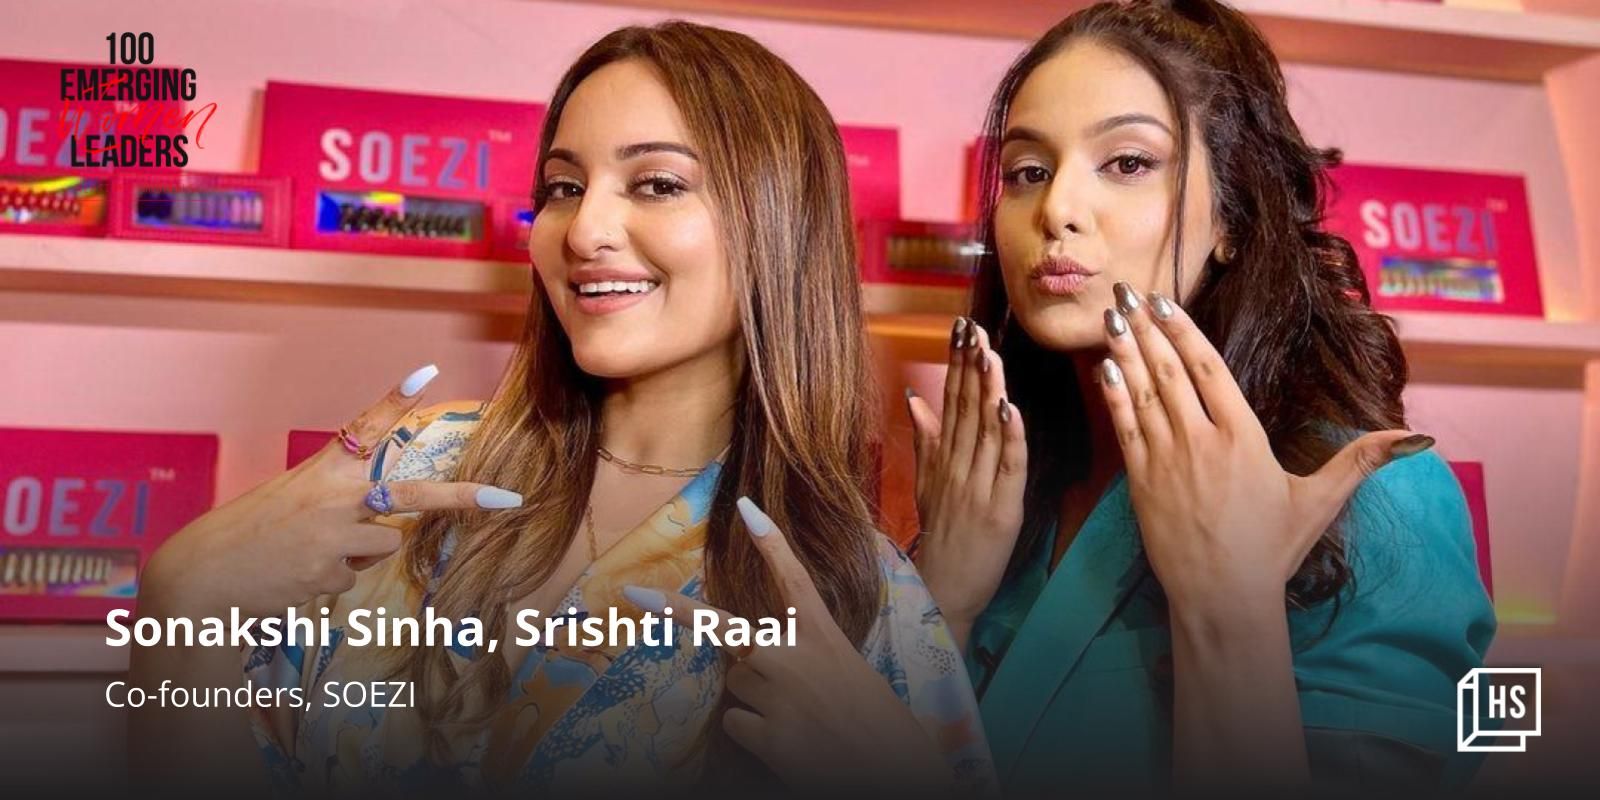 [100 Emerging Women leaders] How actor Sonakshi Sinha and lawyer Srishti Raai collaborated to start a beauty brand
